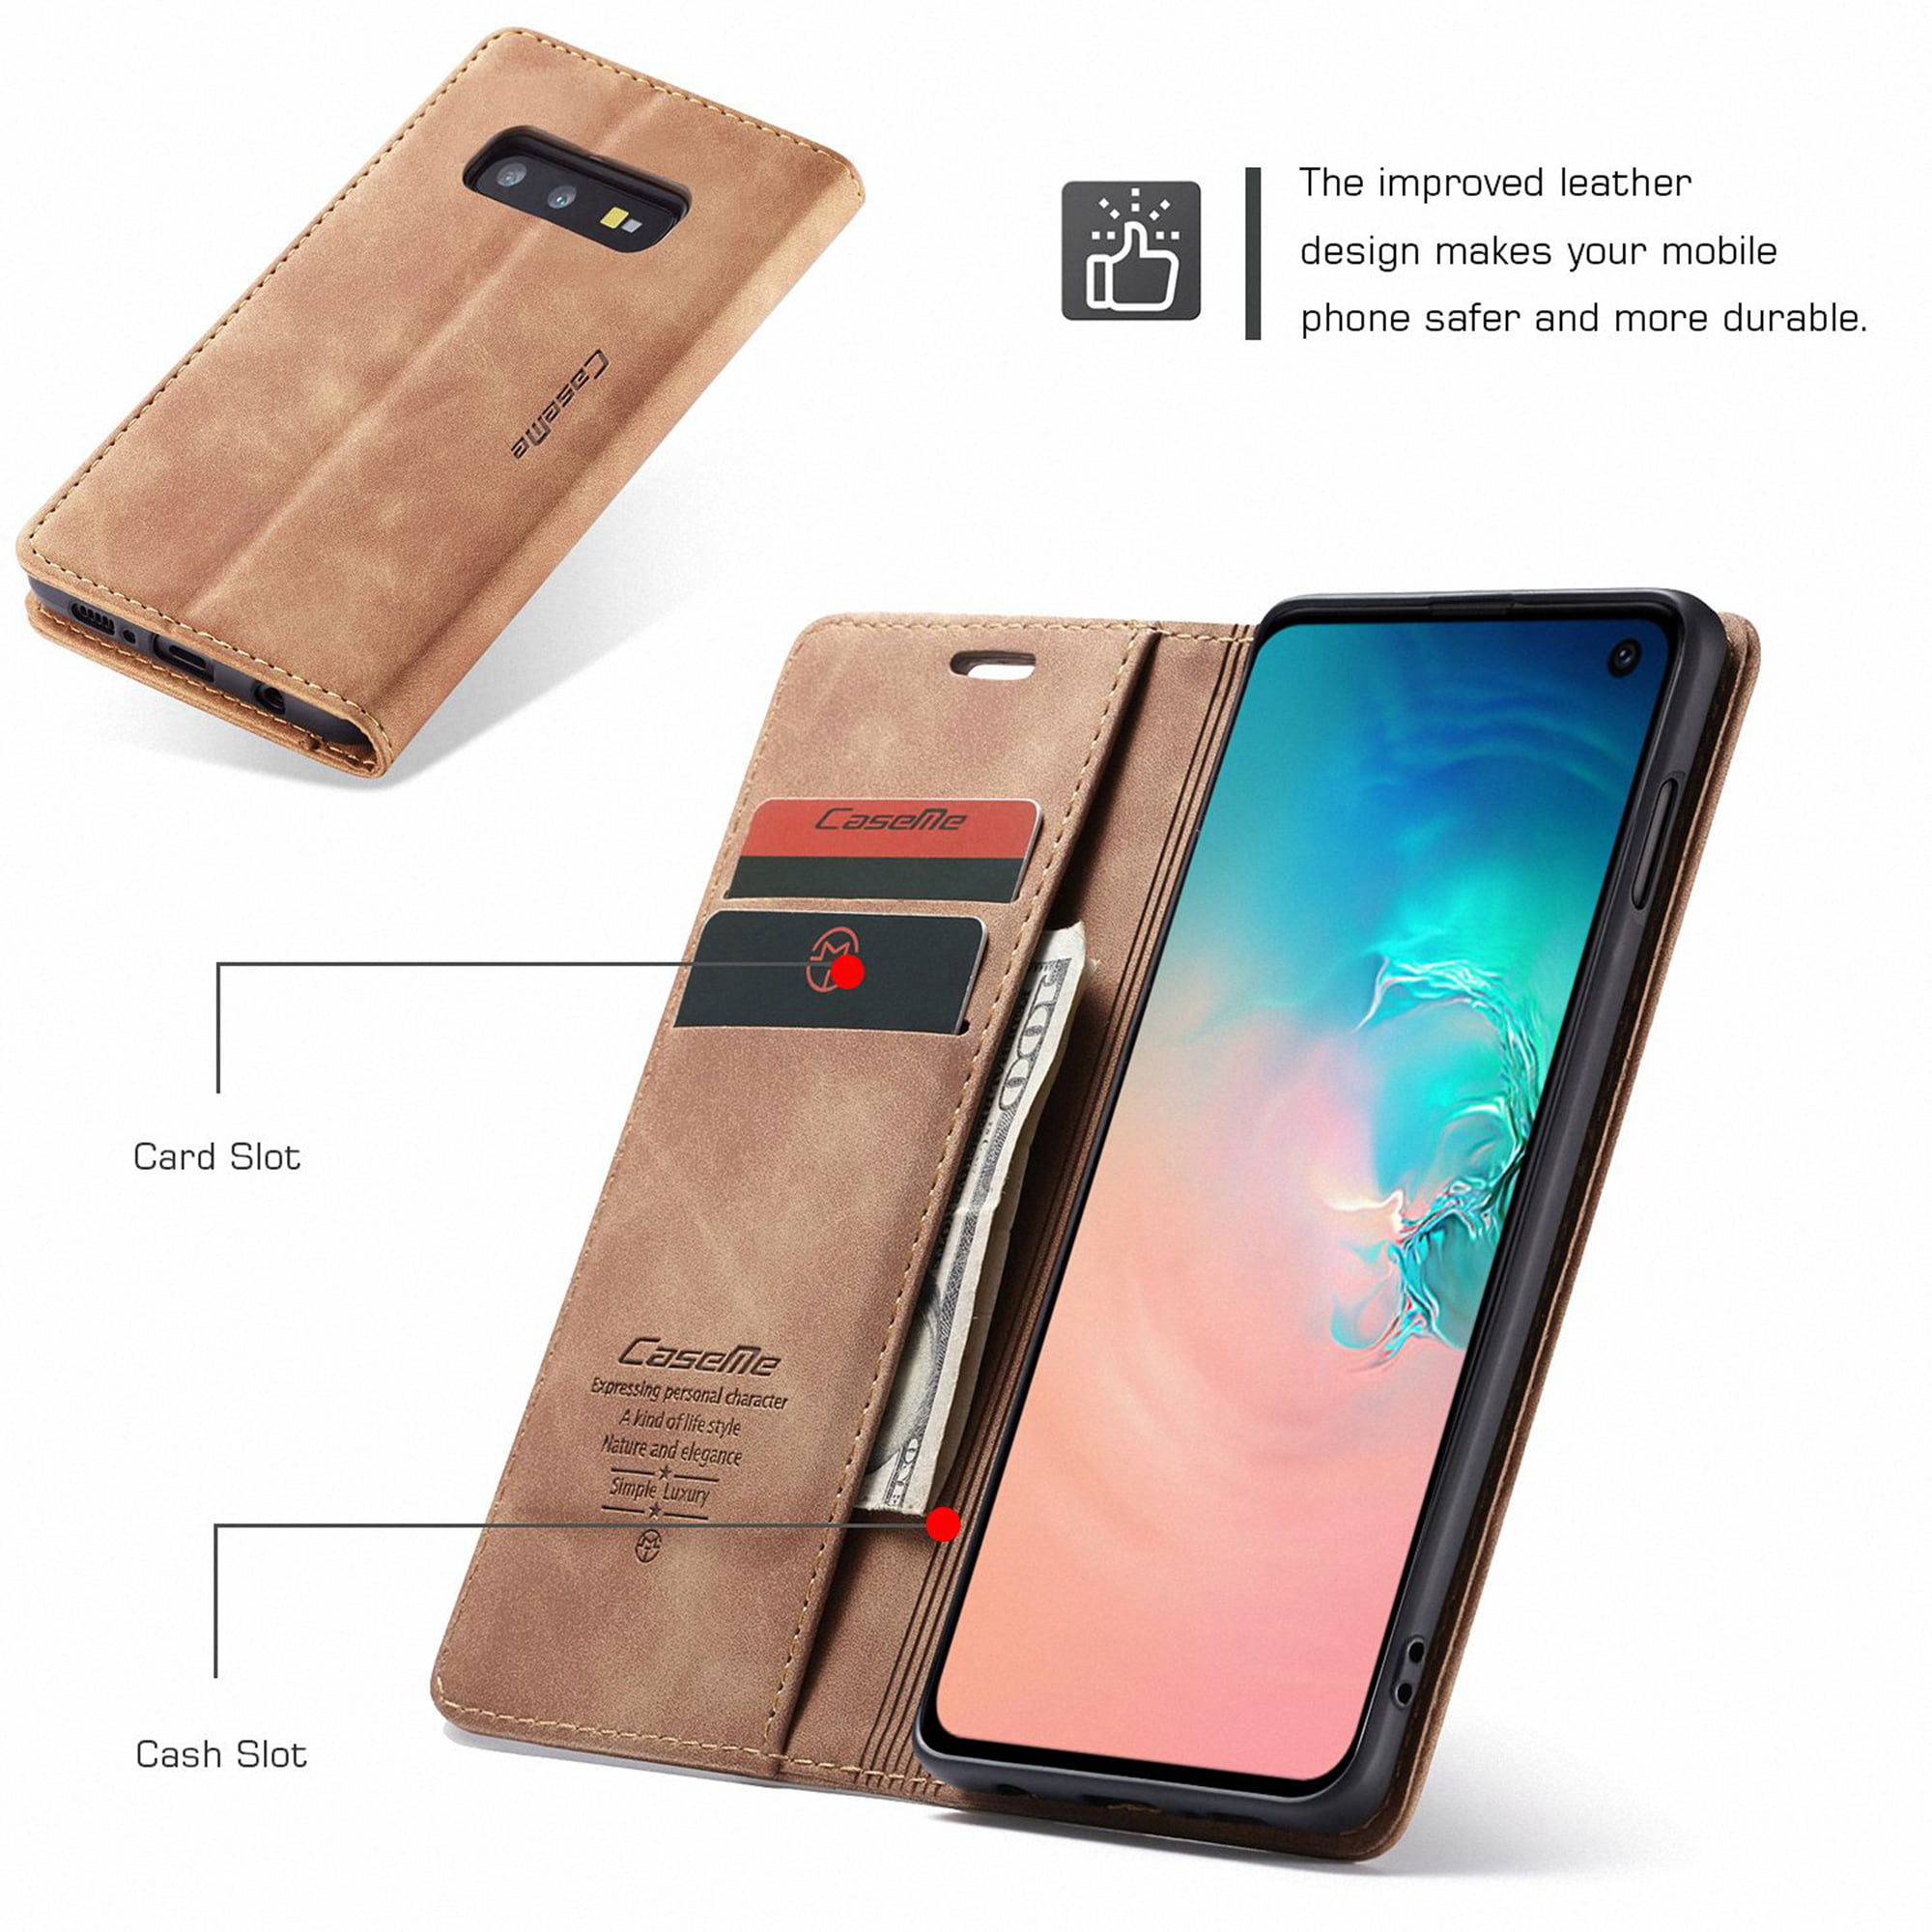 Lomogo Samsung Galaxy S10e LOYBO440246 L6 G970 Case Leather Wallet Case with Kickstand Card Holder Shockproof Flip Case Cover for Samsung Galaxy S10e